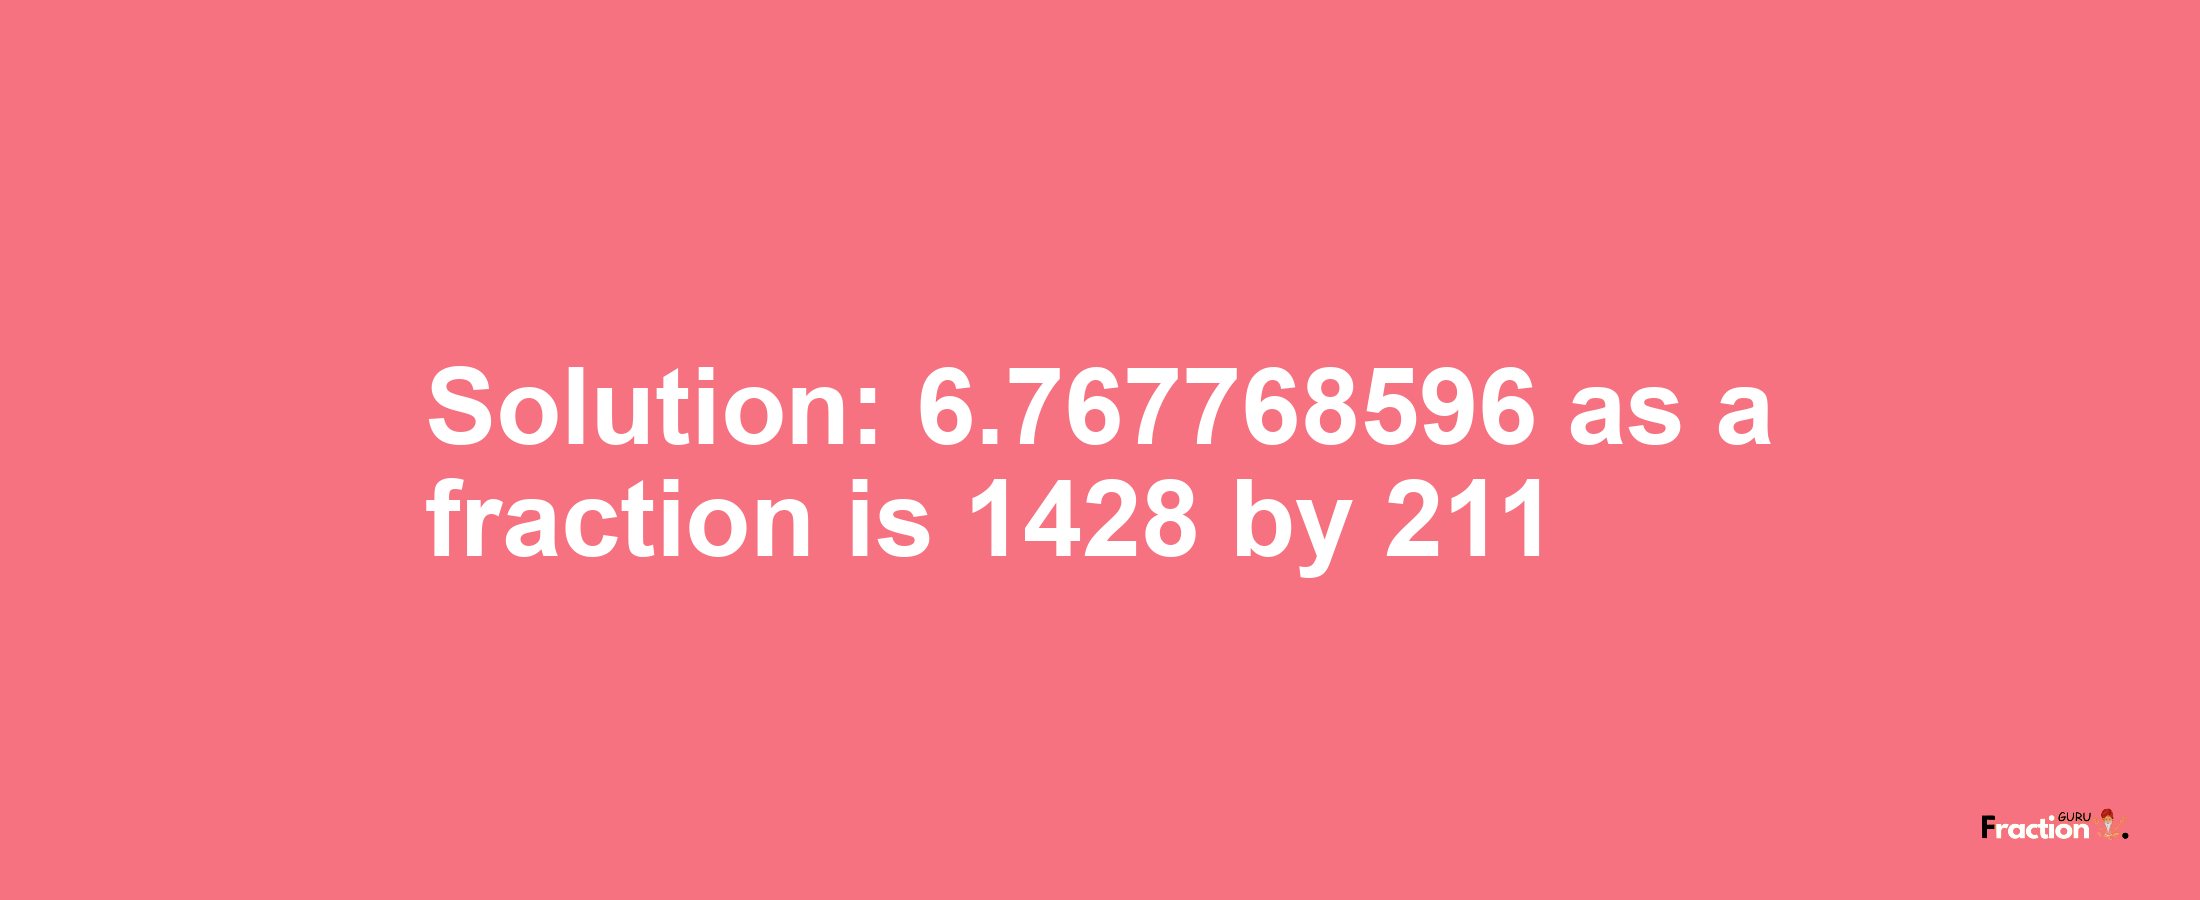 Solution:6.767768596 as a fraction is 1428/211